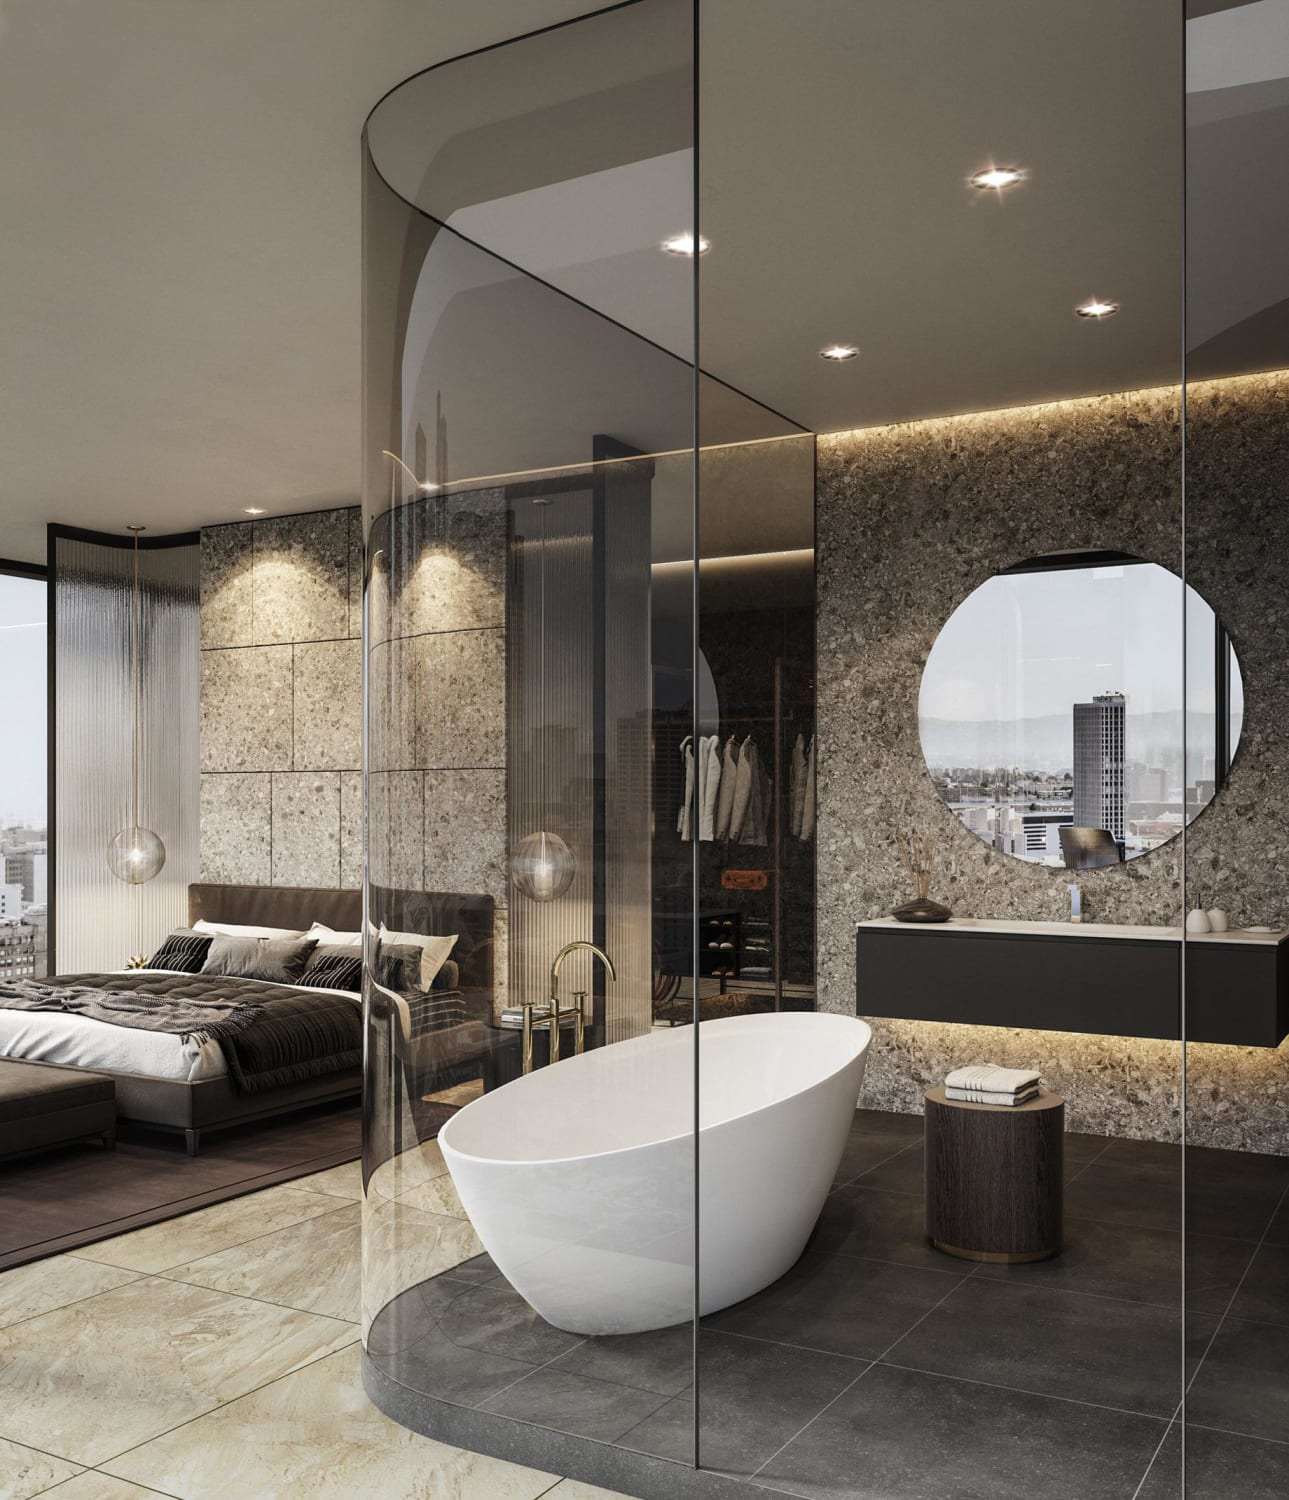 Penthouse Master Bath with Curved Glass Walls - By Georgios Tataridis - Los Angeles, California